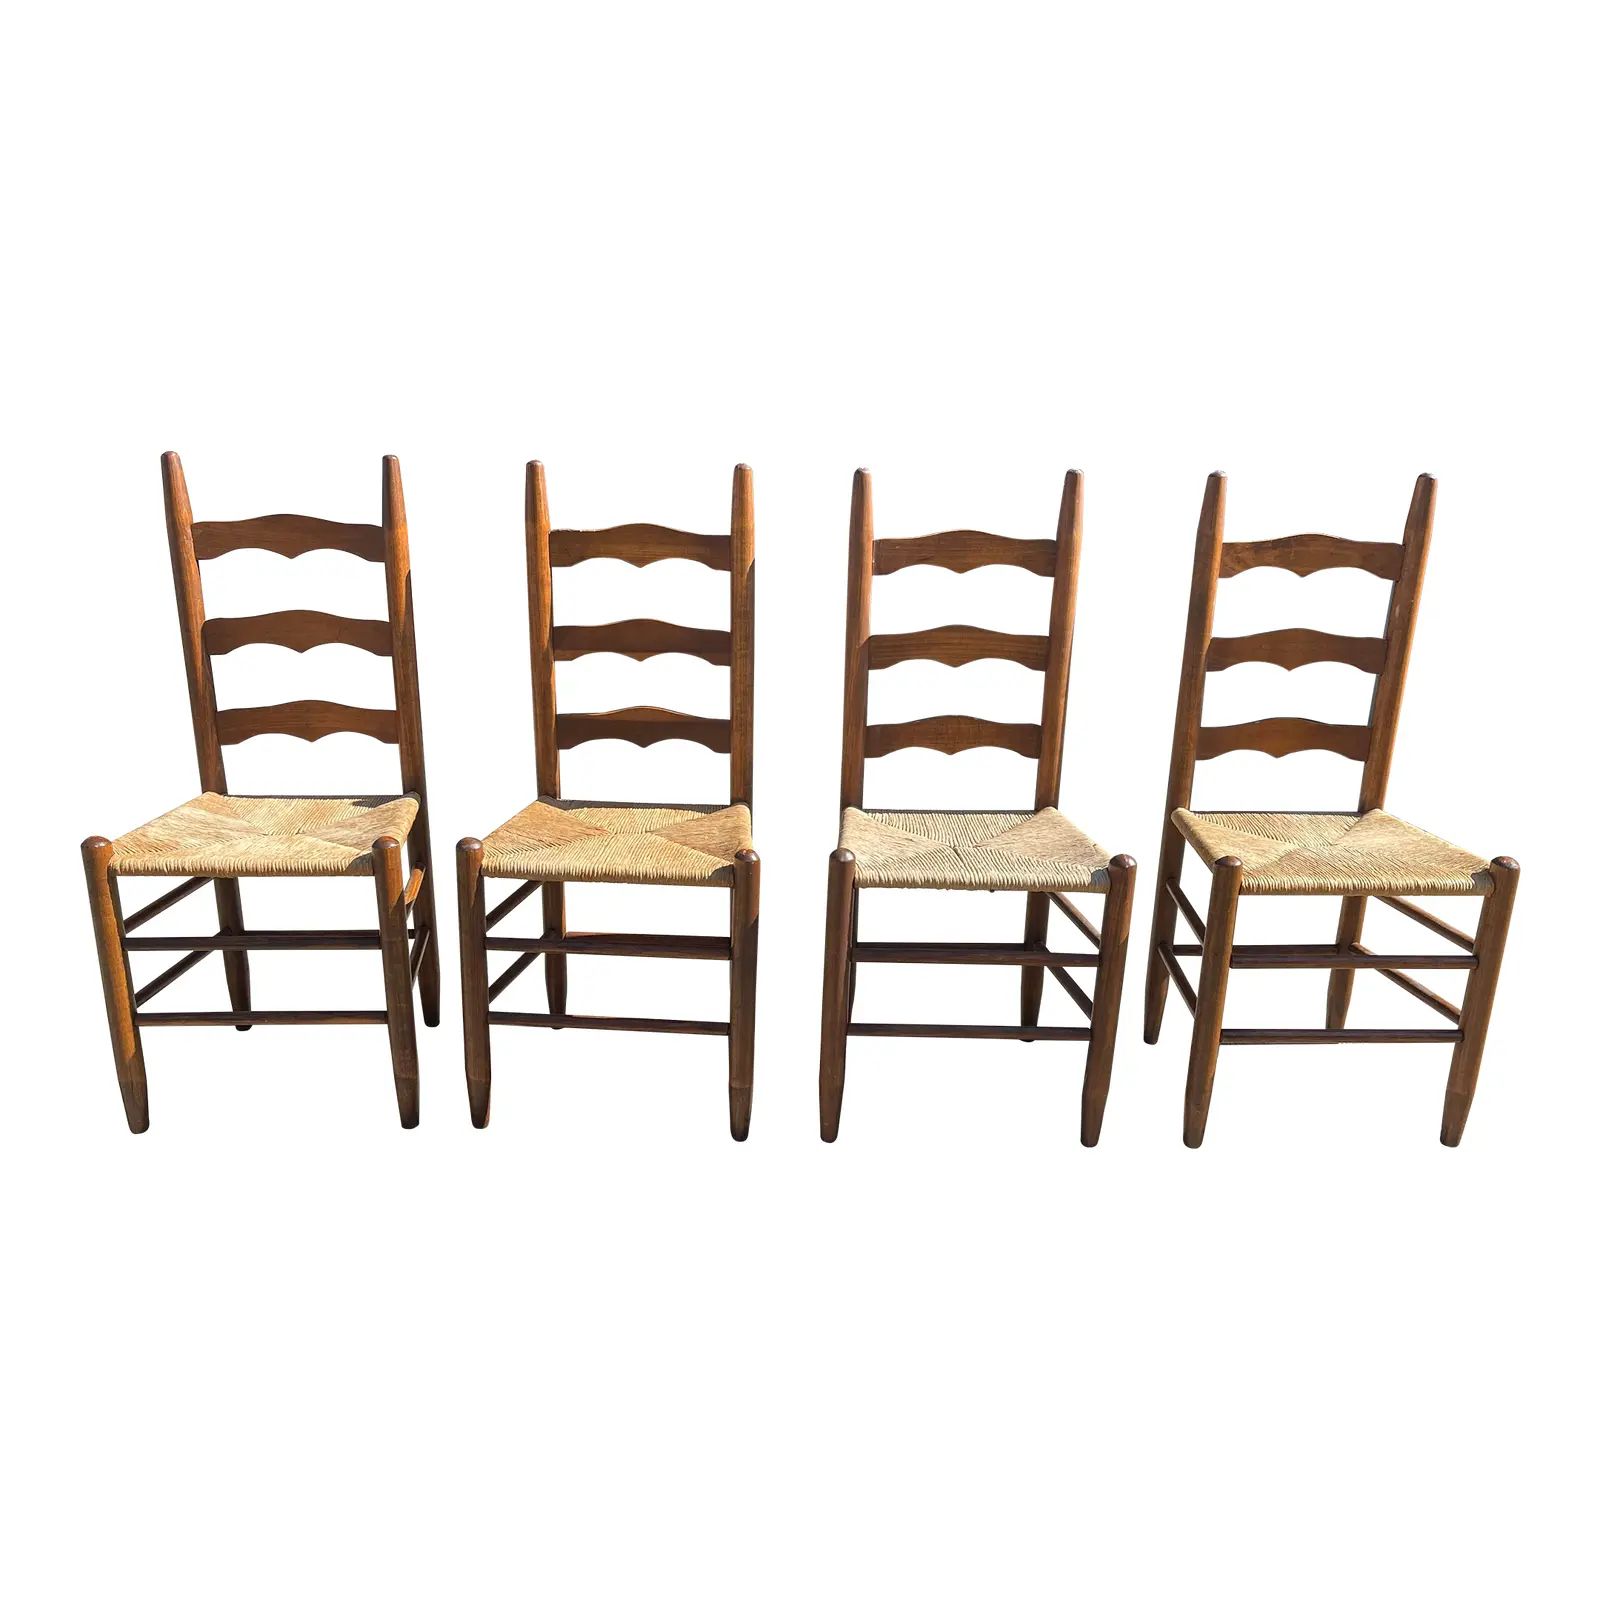 French Ladder Back Chairs Set of 4 | Chairish